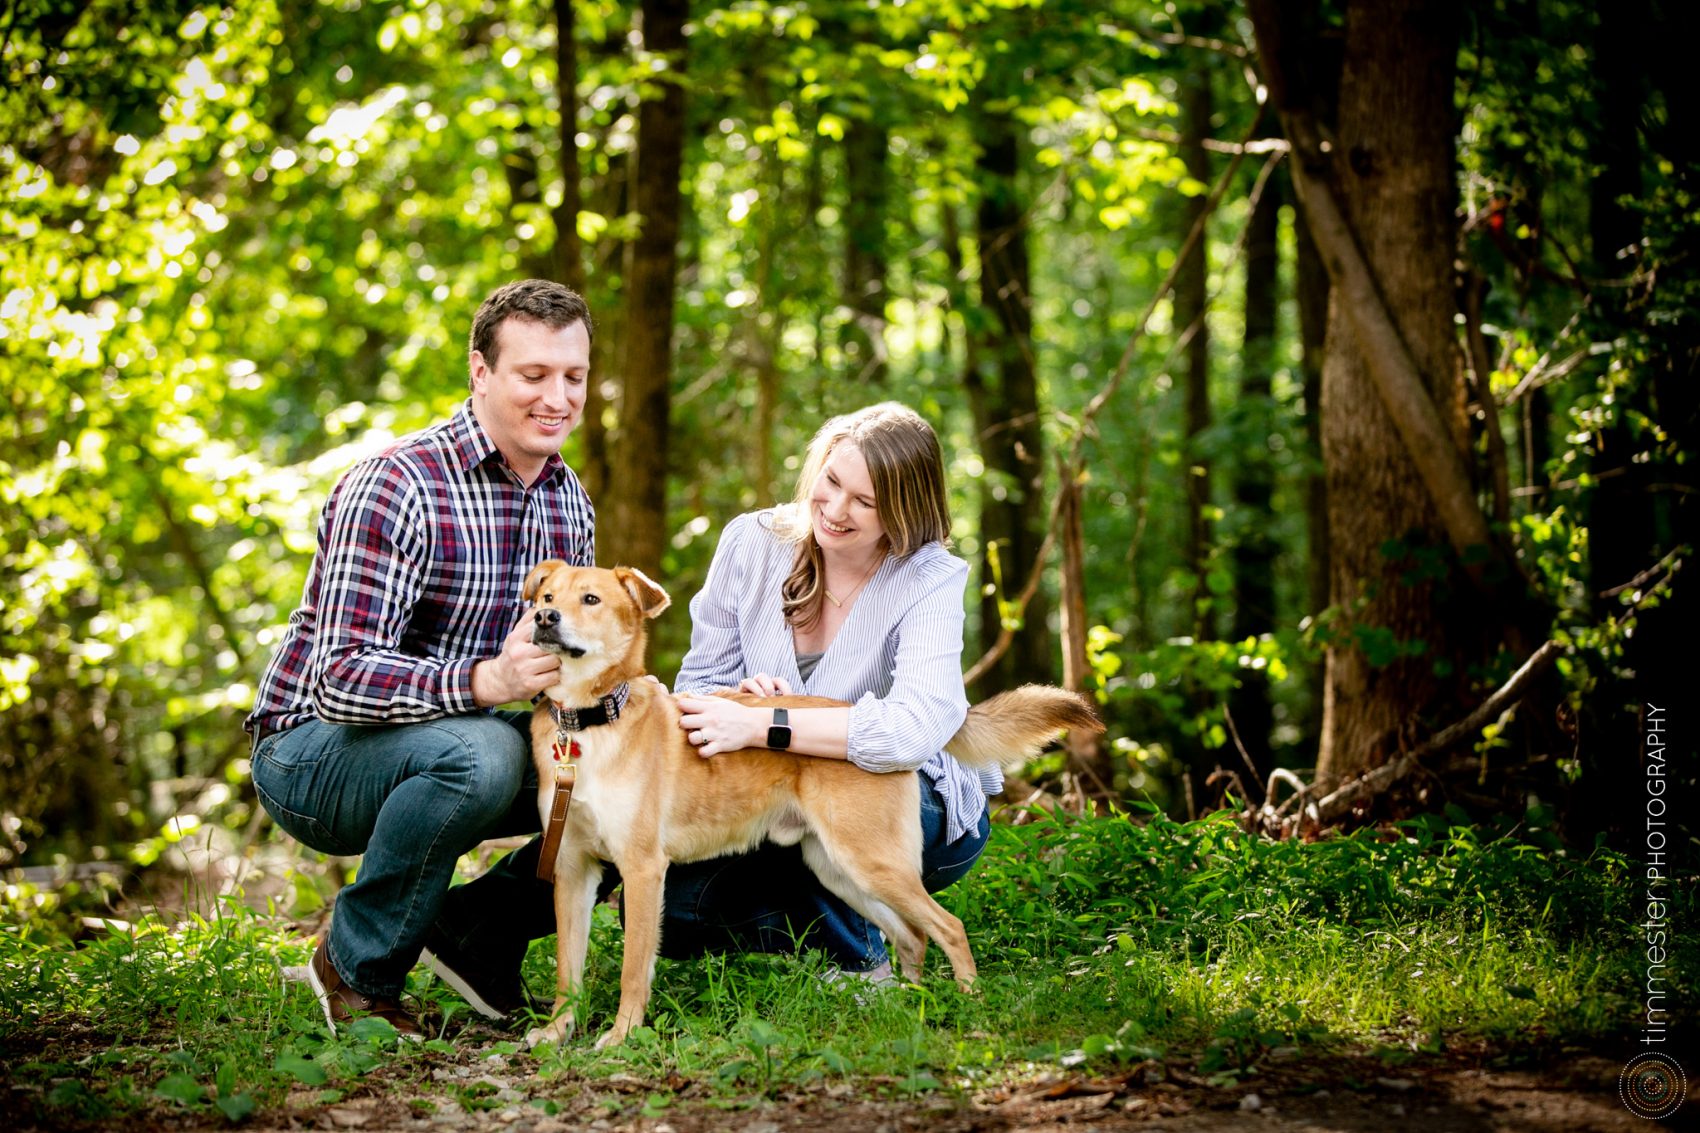 A William B. Umstead Park engagement session complete with a pup!